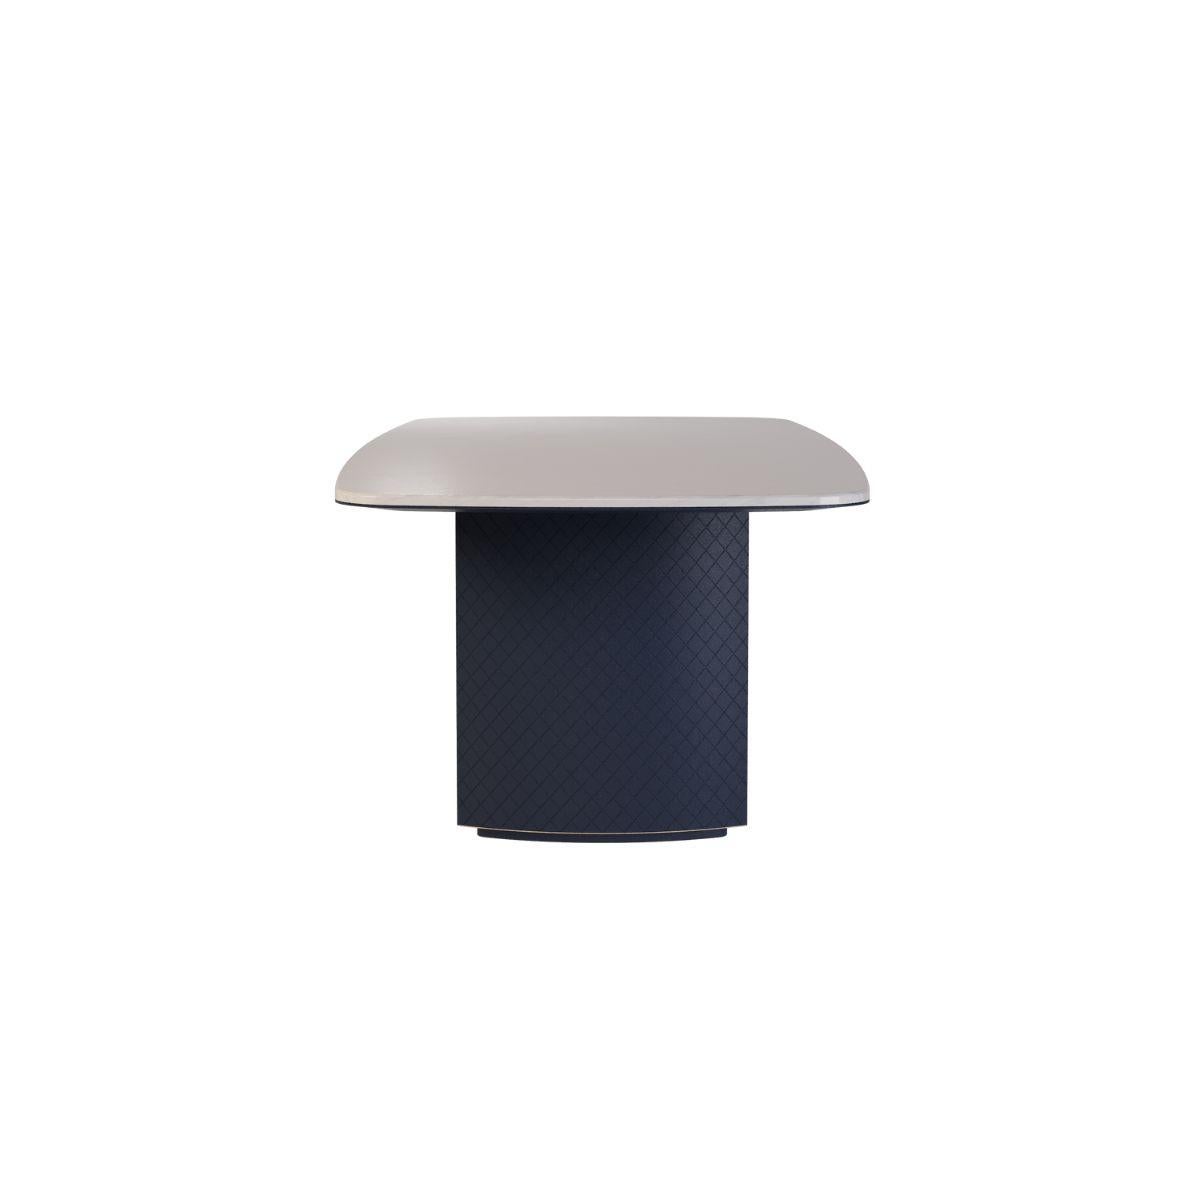 Verve Dining Table

In essence, the Verve dining table is a celebration of the vibrancy and potential of life. It's about infusing every moment around the table with passion and enthusiasm, enjoying every moment. Its fiberglass structure, marble top